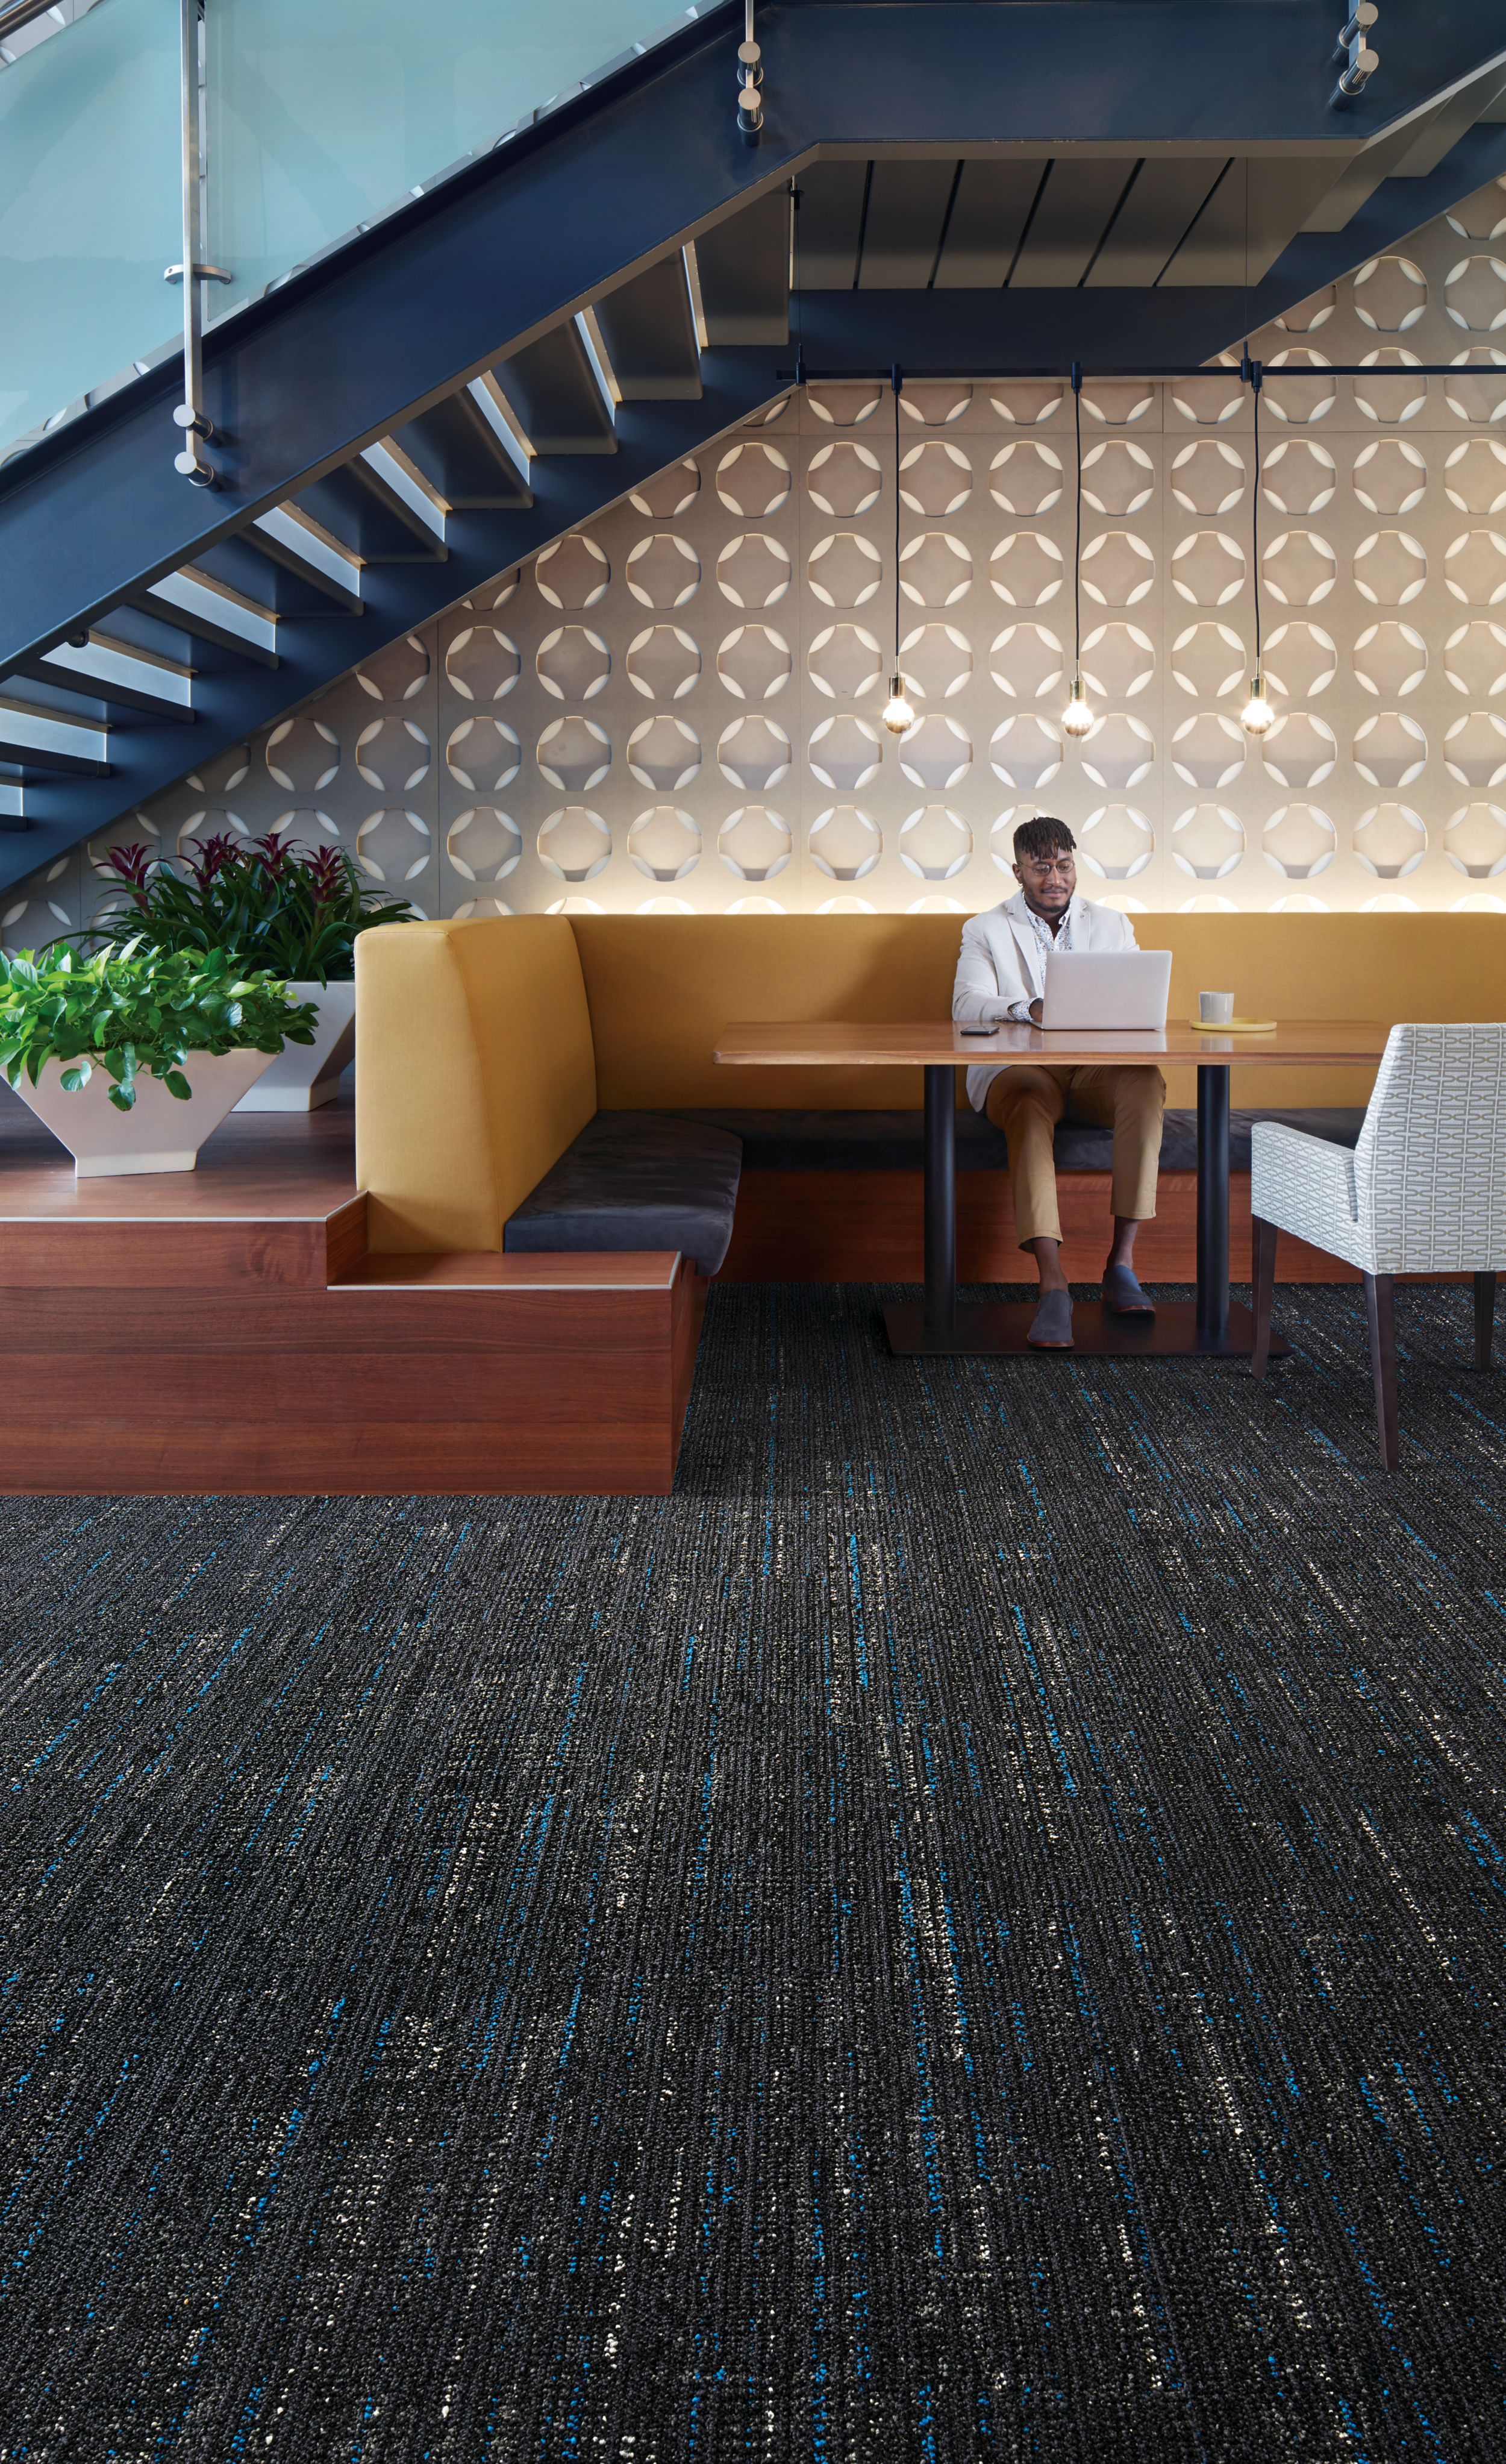 Interface Bitrate plank carpet tile in seating area with stairwell imagen número 6